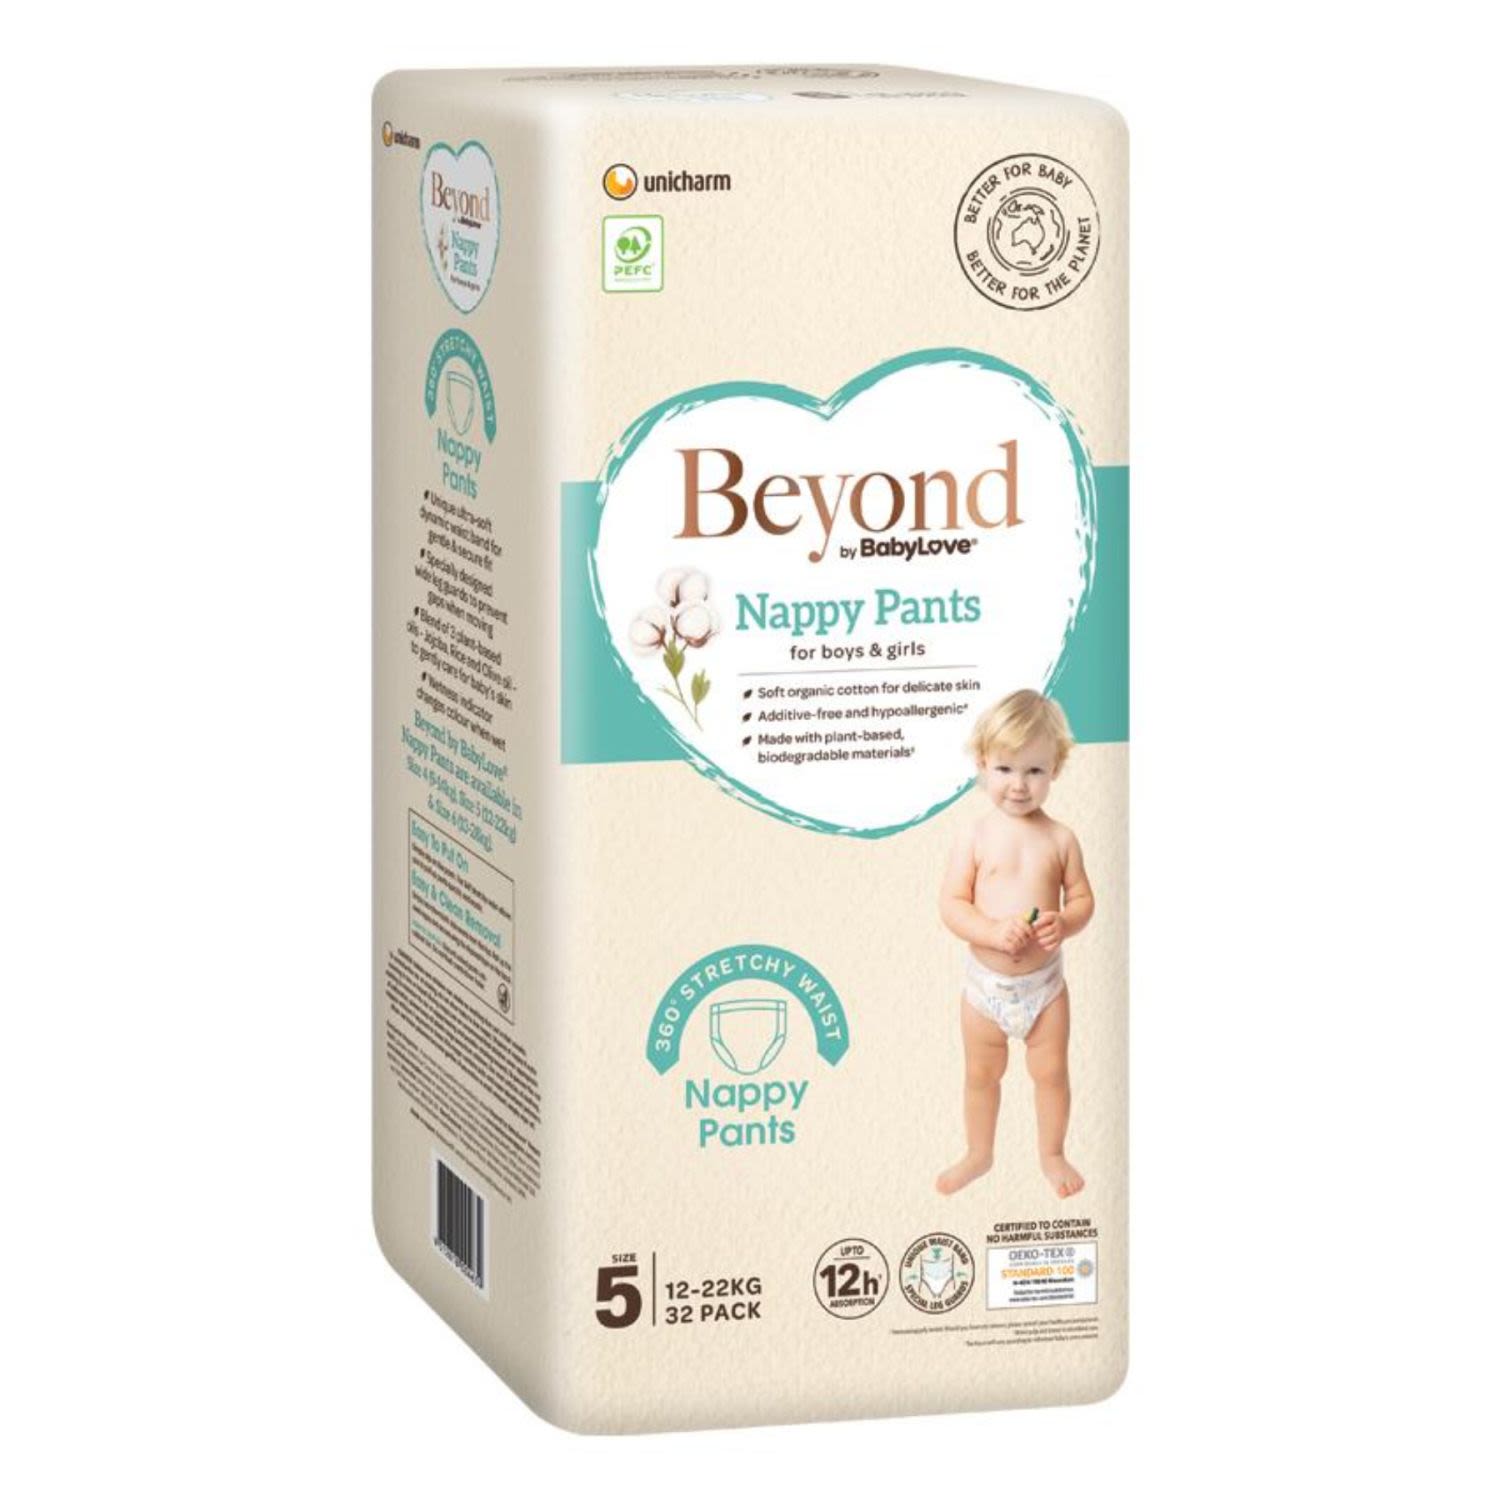 BabyLove Beyond Nappy Pants Size 5, 32 Each